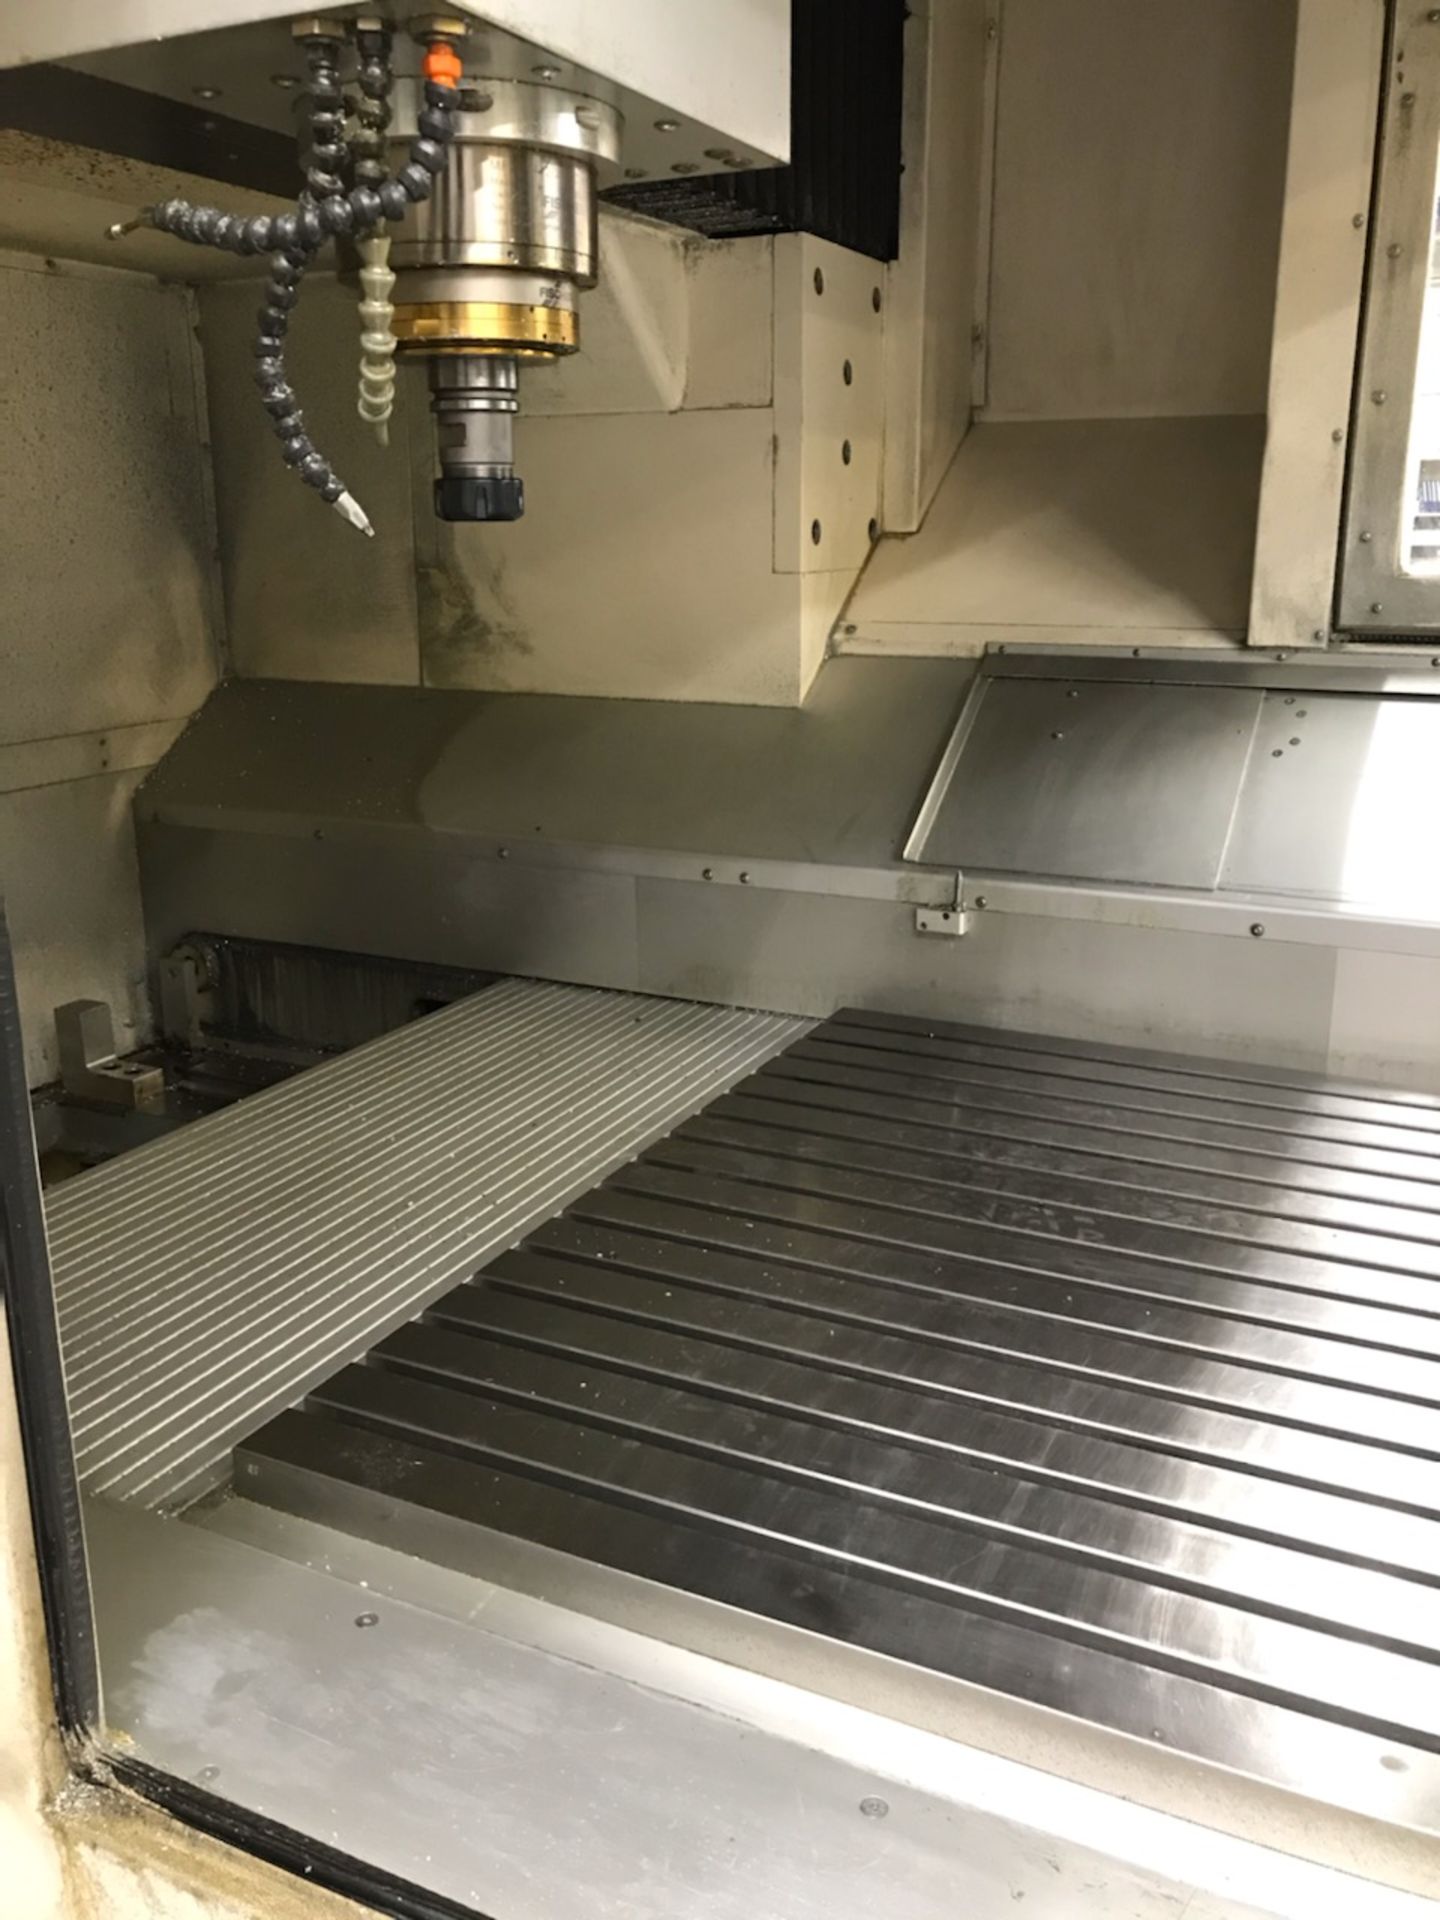 Roders RFM 1000 CNC 3-Axis Vertical Machining Center, New 2004 (see Notes) - Image 3 of 11